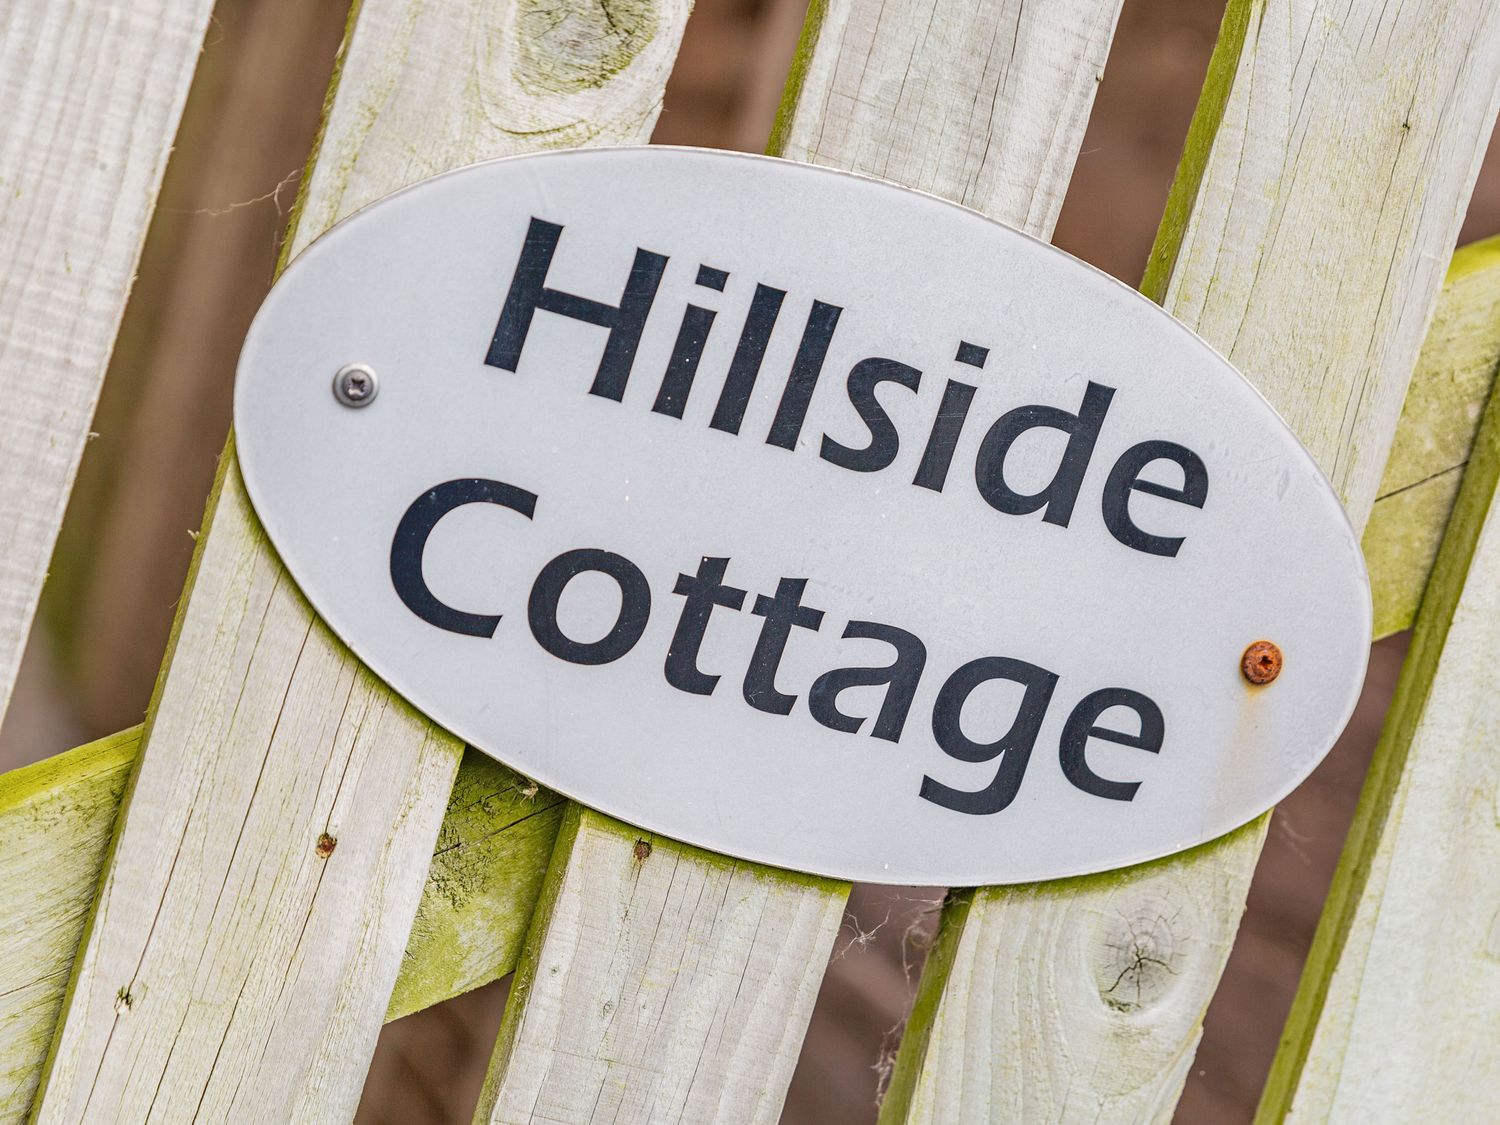 Hillside Cottage, West Country